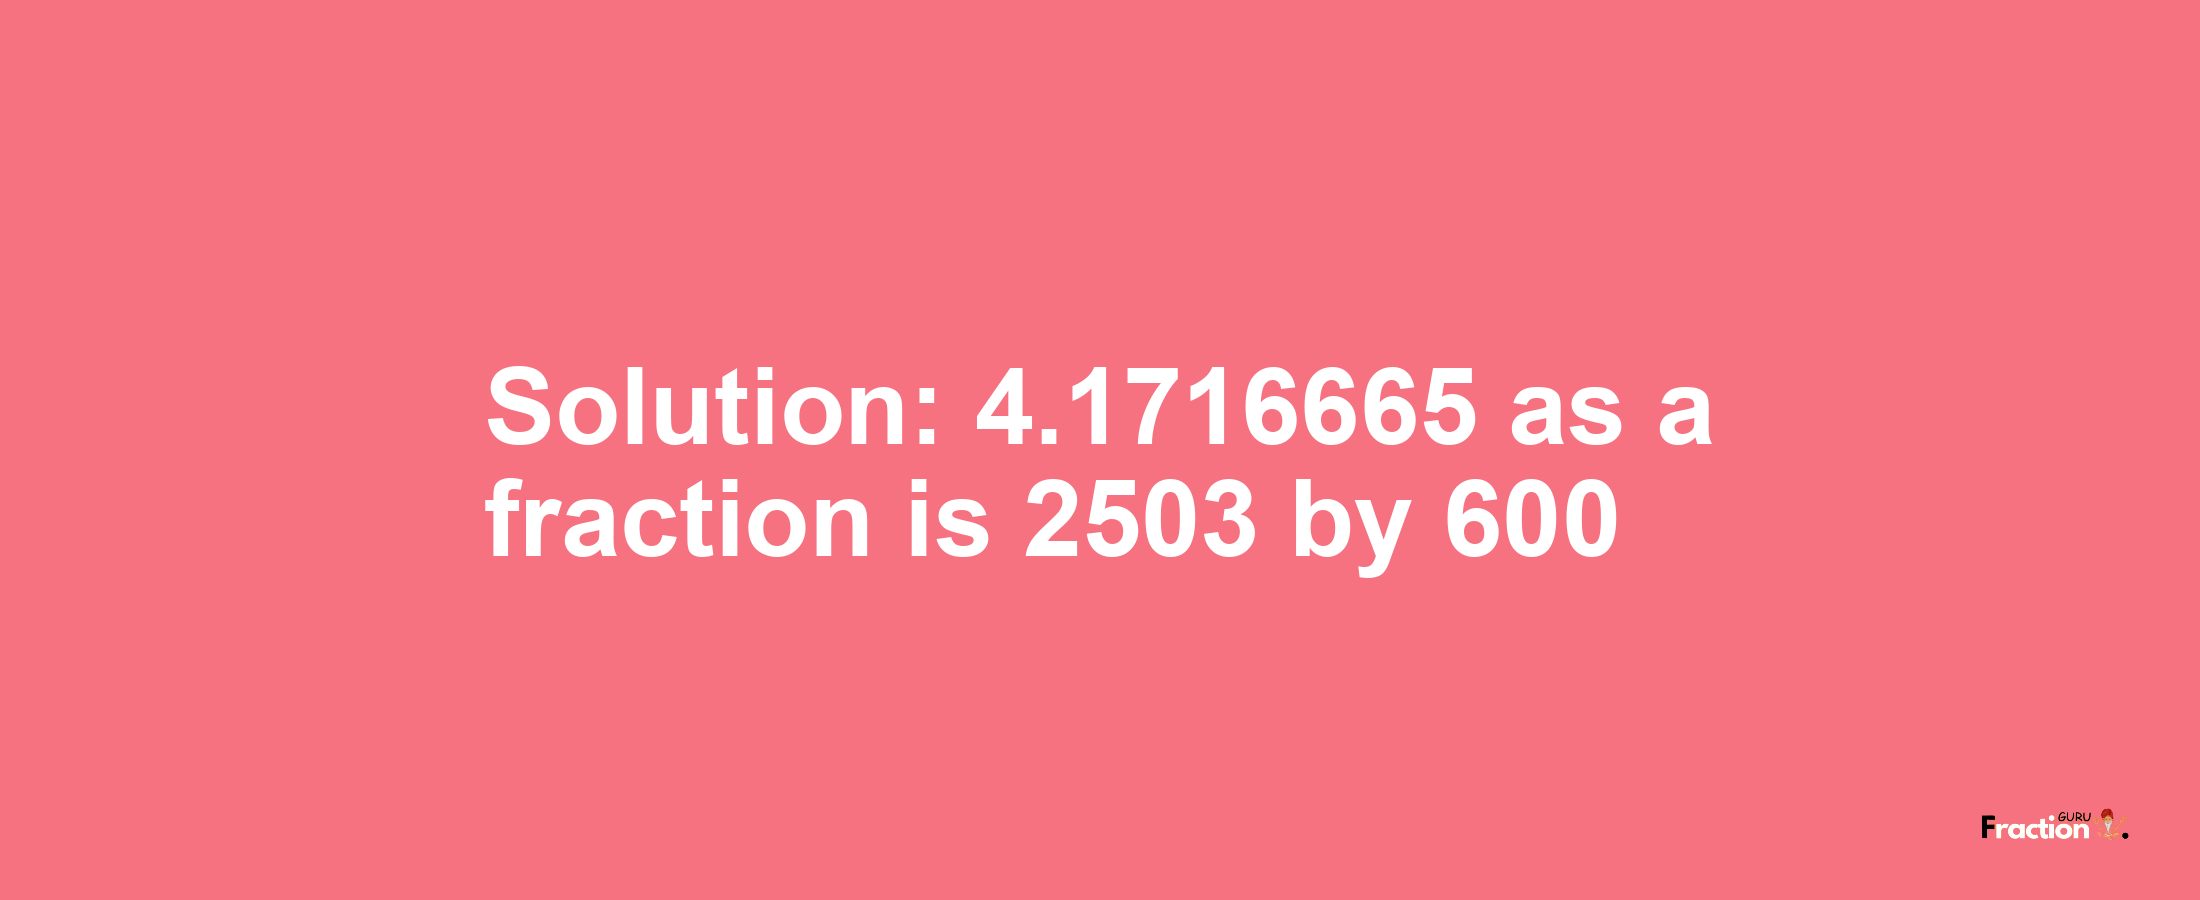 Solution:4.1716665 as a fraction is 2503/600